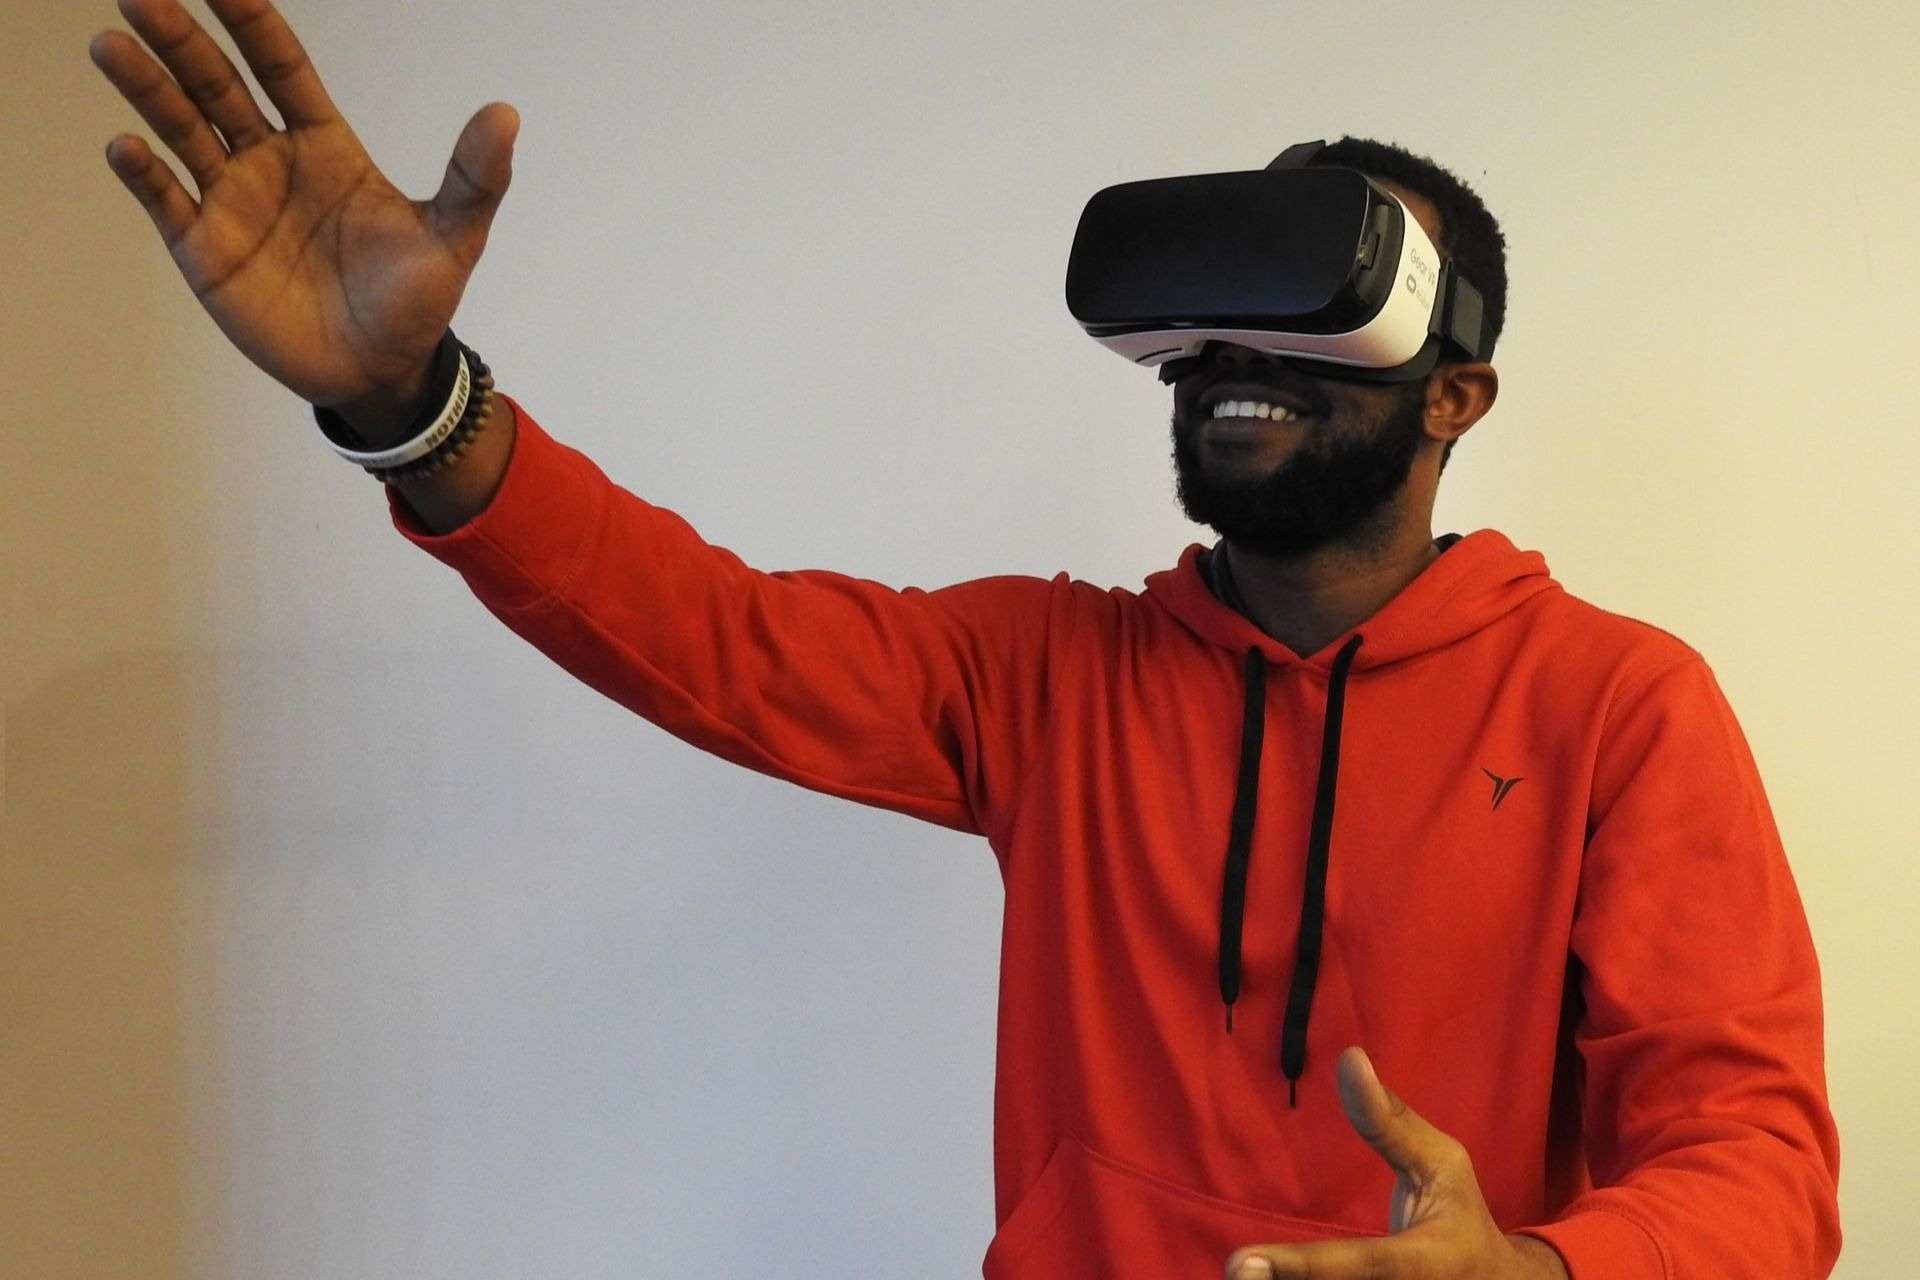 Student wearing virtual reality headset, to portray future focus